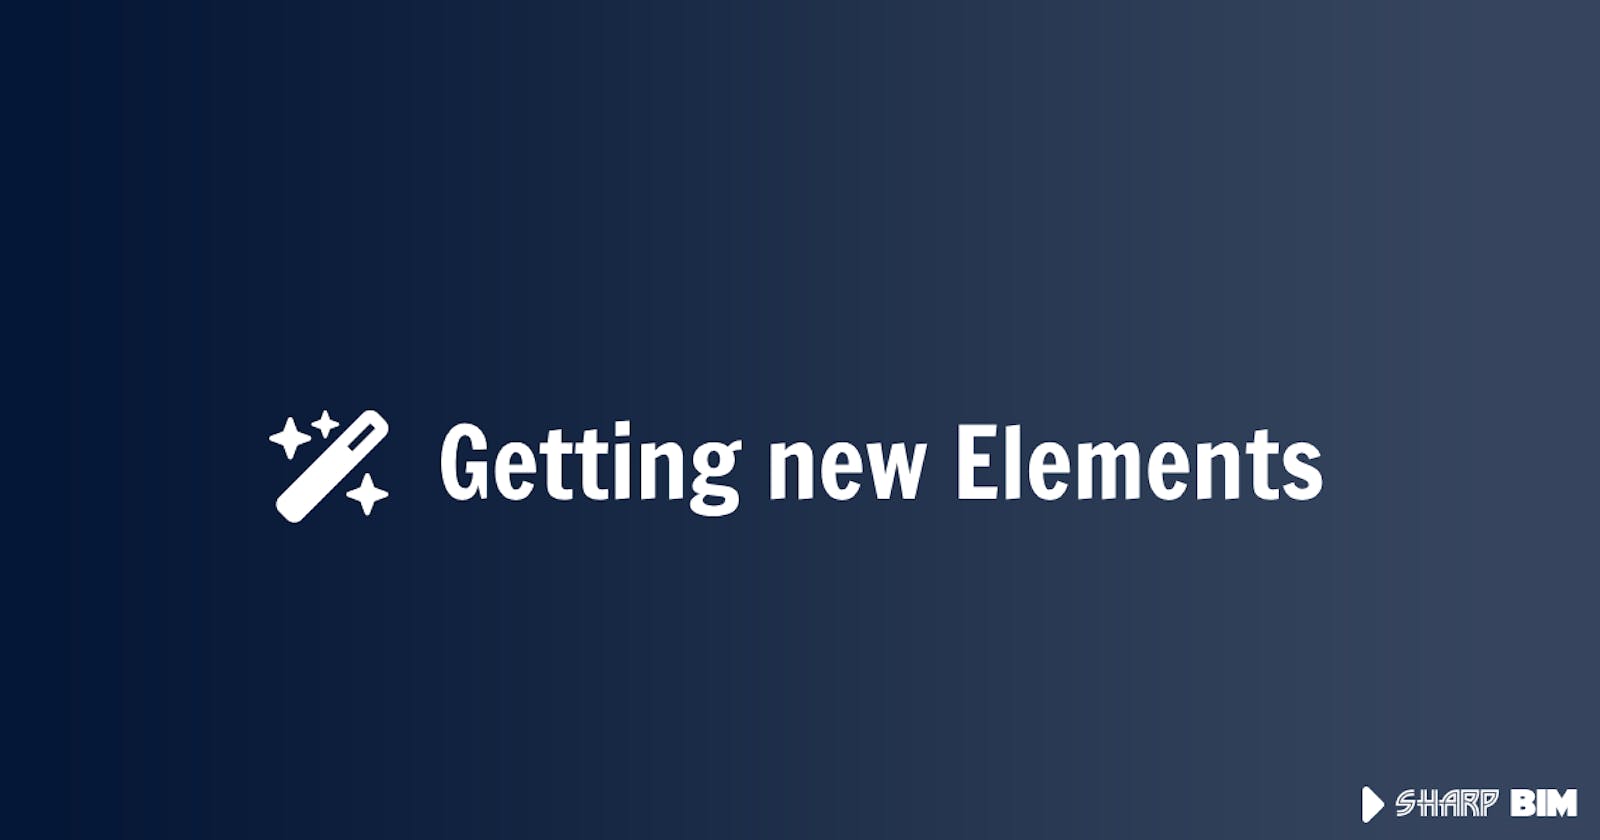 Getting new Elements